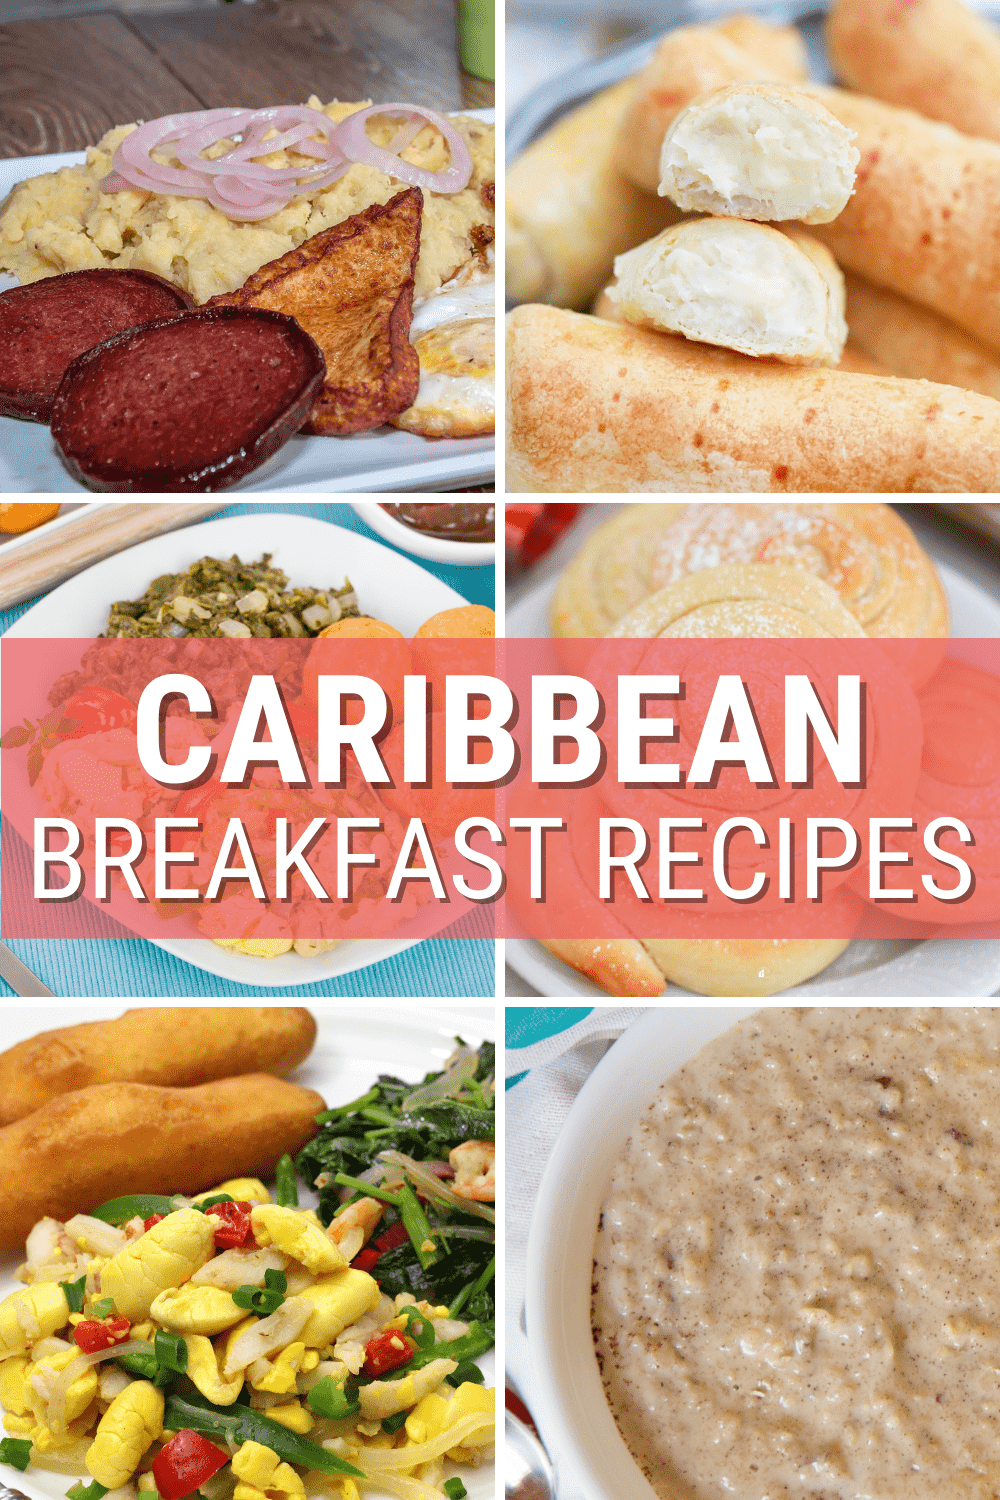 Start your day with a delicious taste of the Caribbean! These breakfast recipes are full of flavor and will get your day off to a great start. via @mystayathome